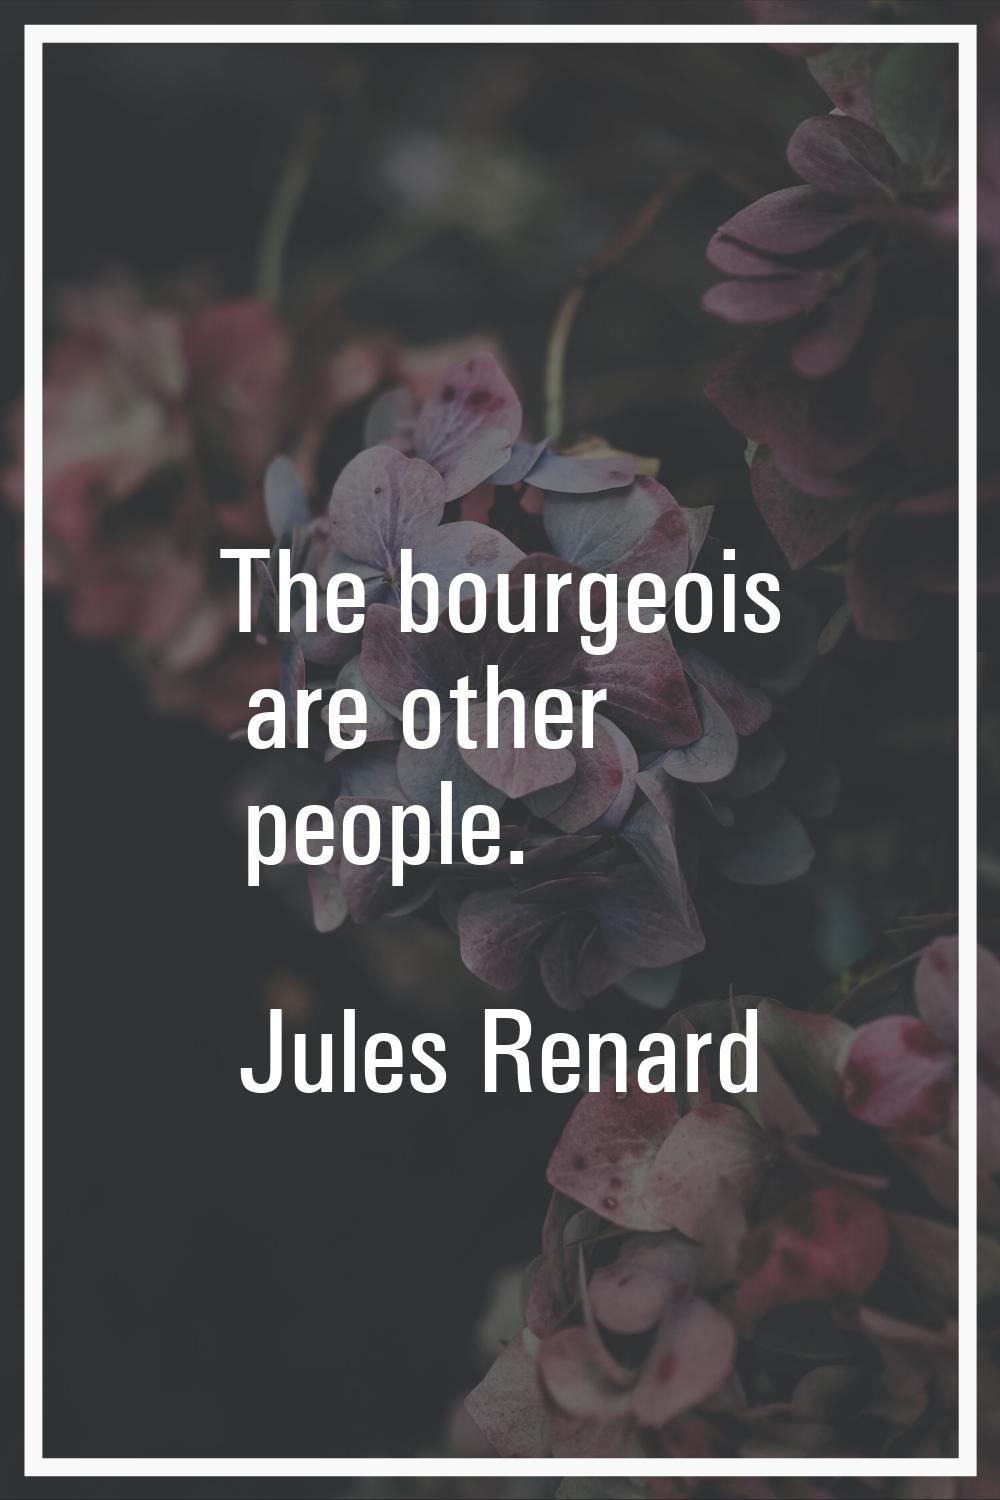 The bourgeois are other people.